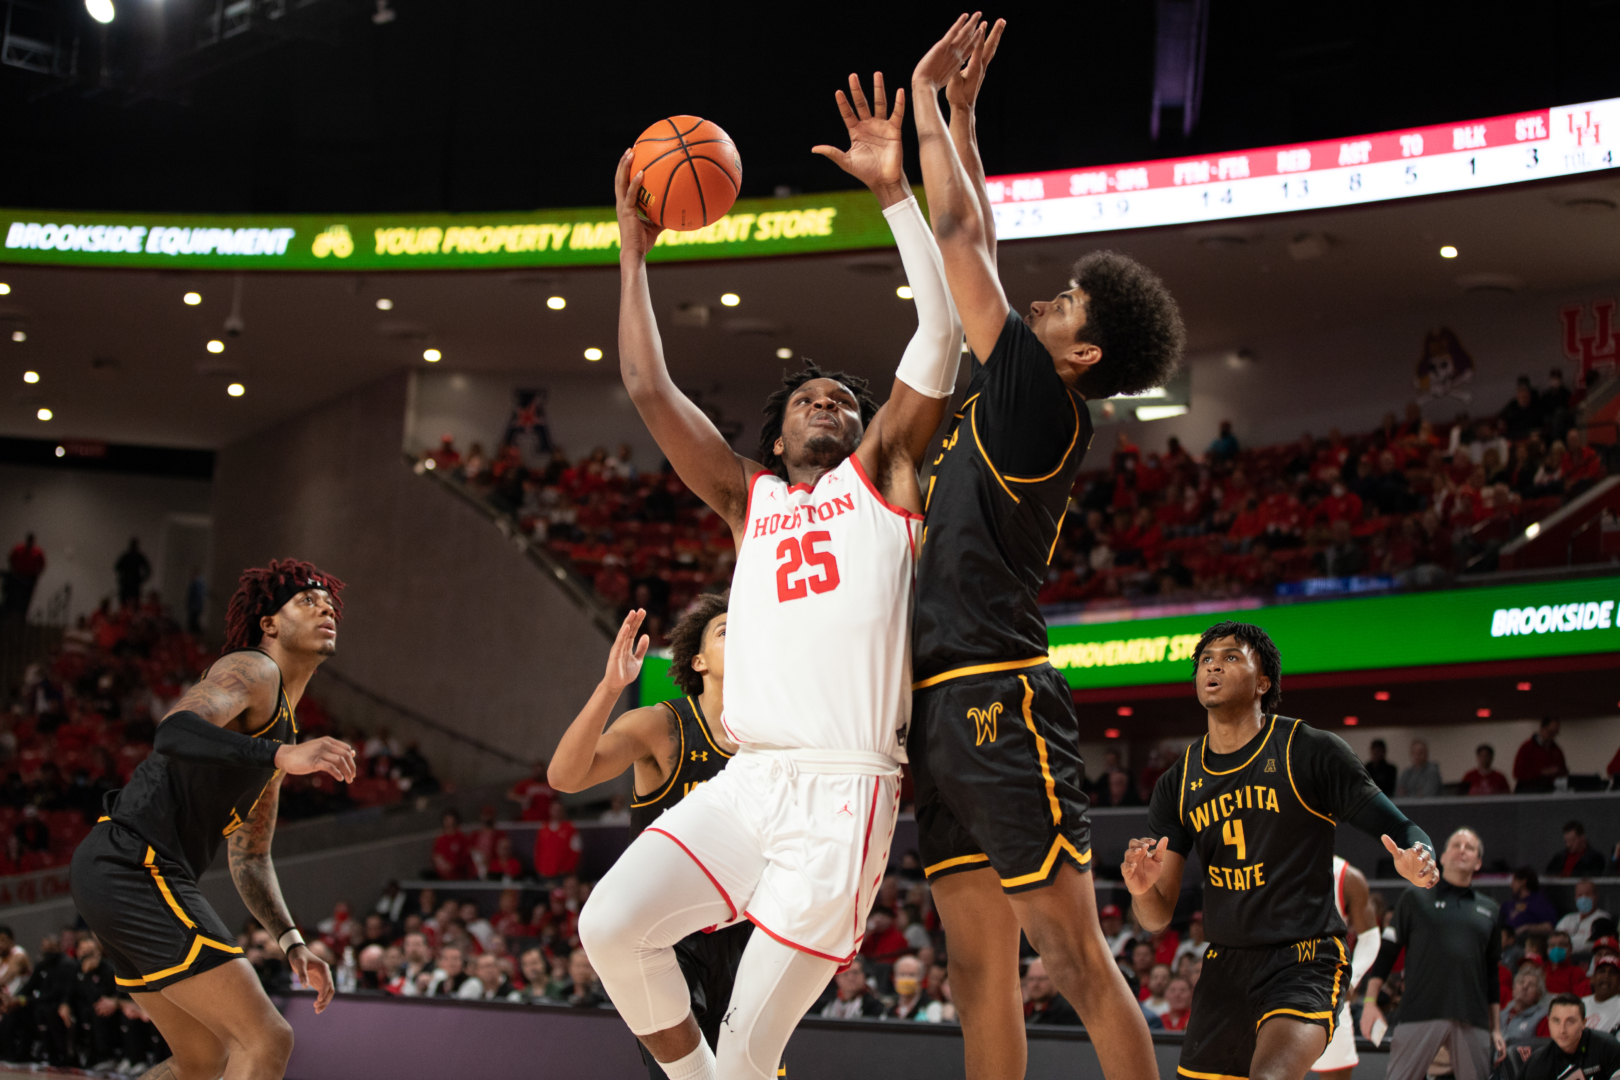 For the second consecutive game, Josh Carlton led the Cougars in scoring. The 6-foot-10-inch UH center scored a game-high 22 points to go along with 12 rebounds for his second consecutive double-double. | Sean Thomas/The Cougar